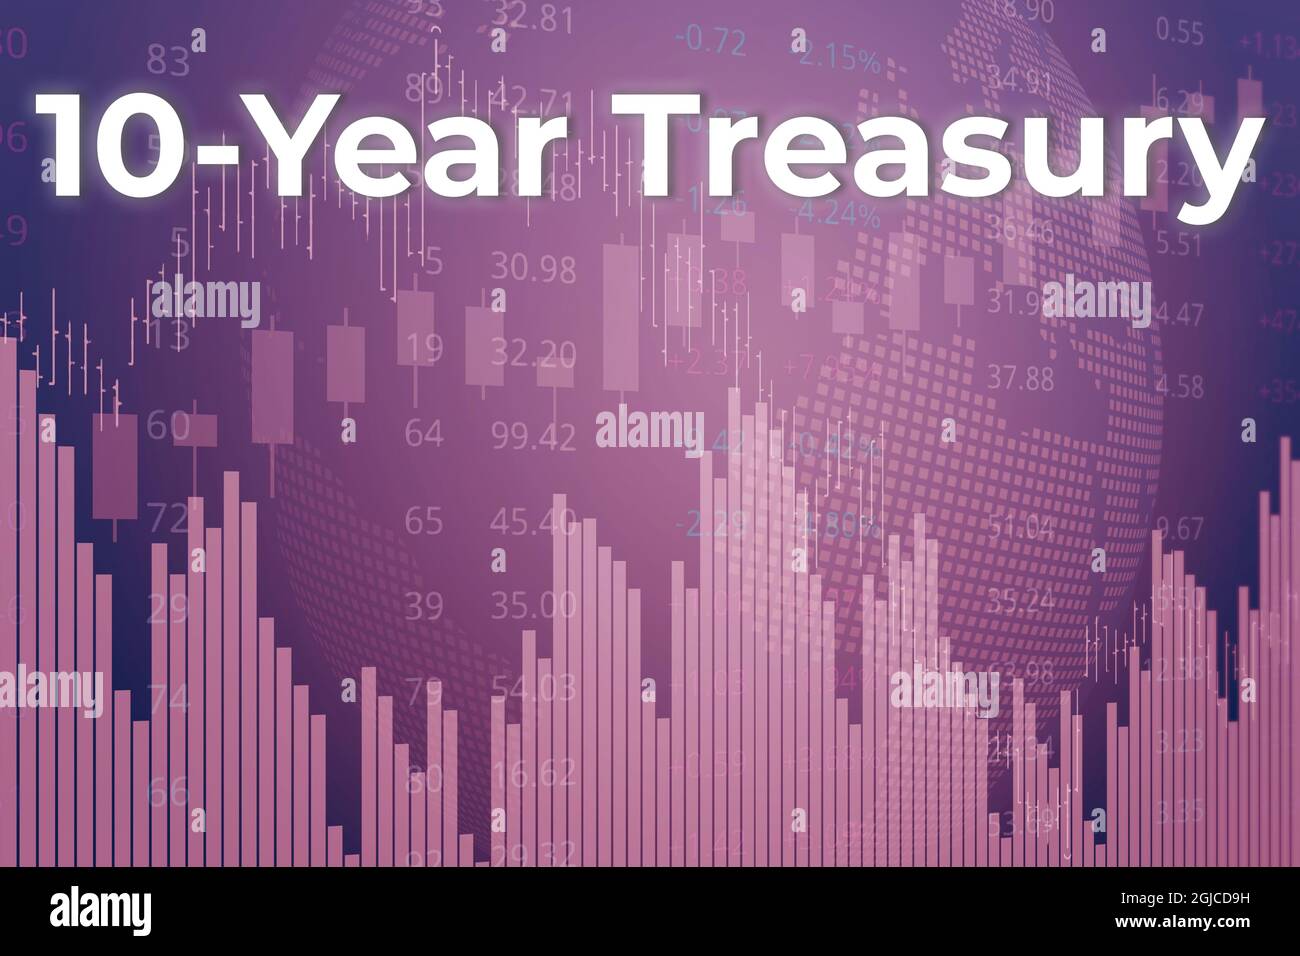 Price change when trading bonds 10-Year Treasury on magenta finance background from graphs, charts, columns, pillars, candle, bars, number. Trend Up a Stock Photo